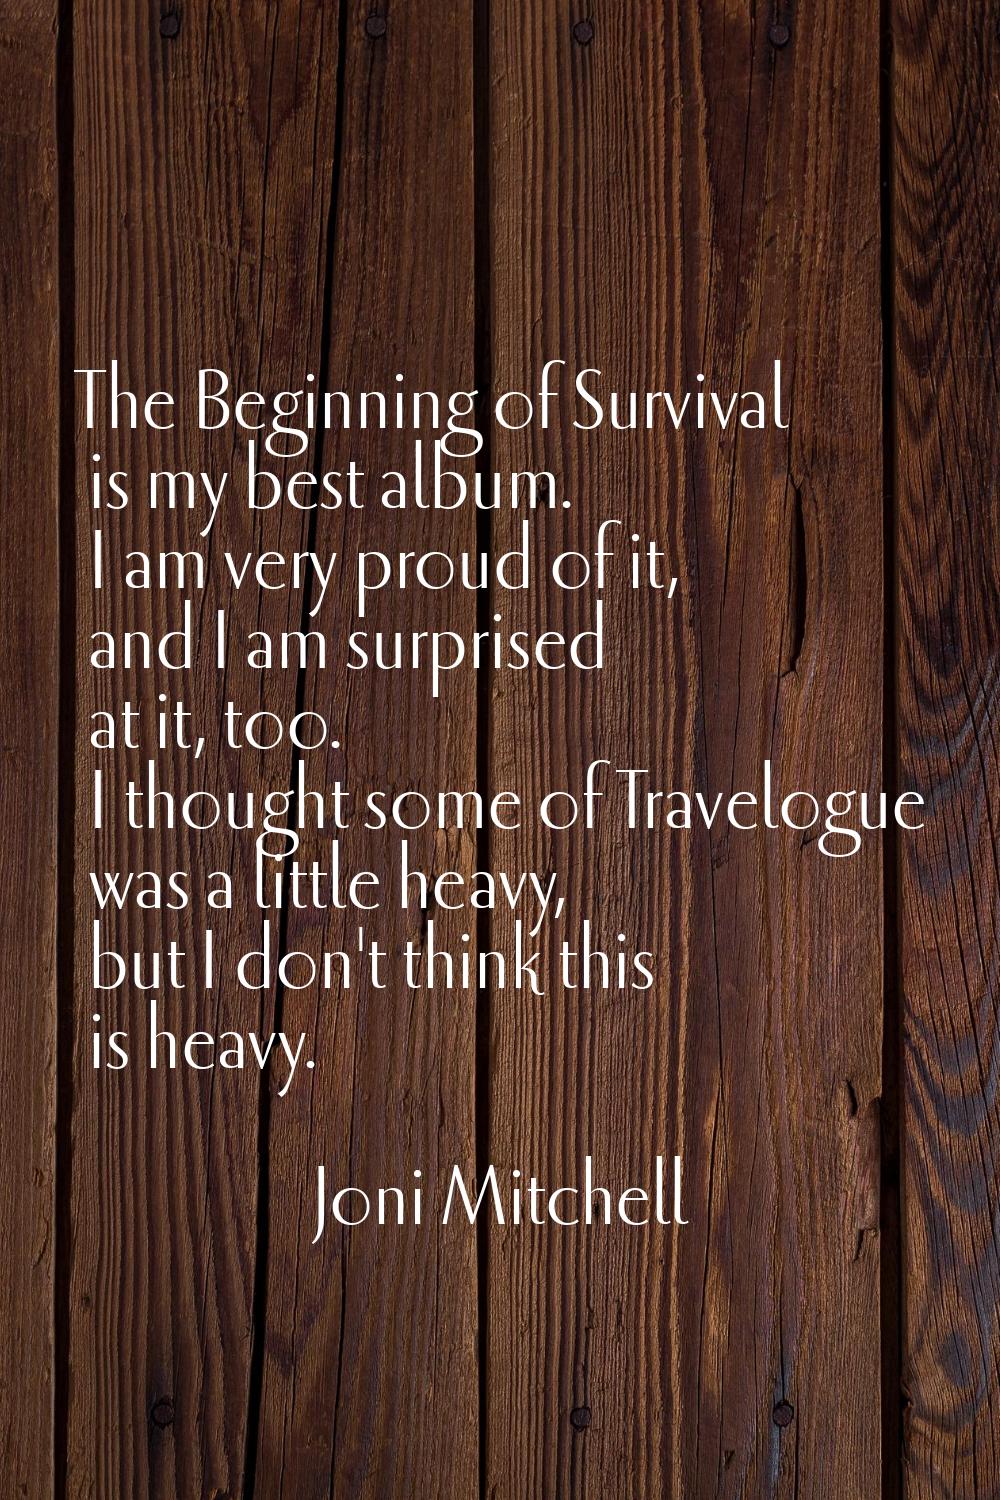 The Beginning of Survival is my best album. I am very proud of it, and I am surprised at it, too. I